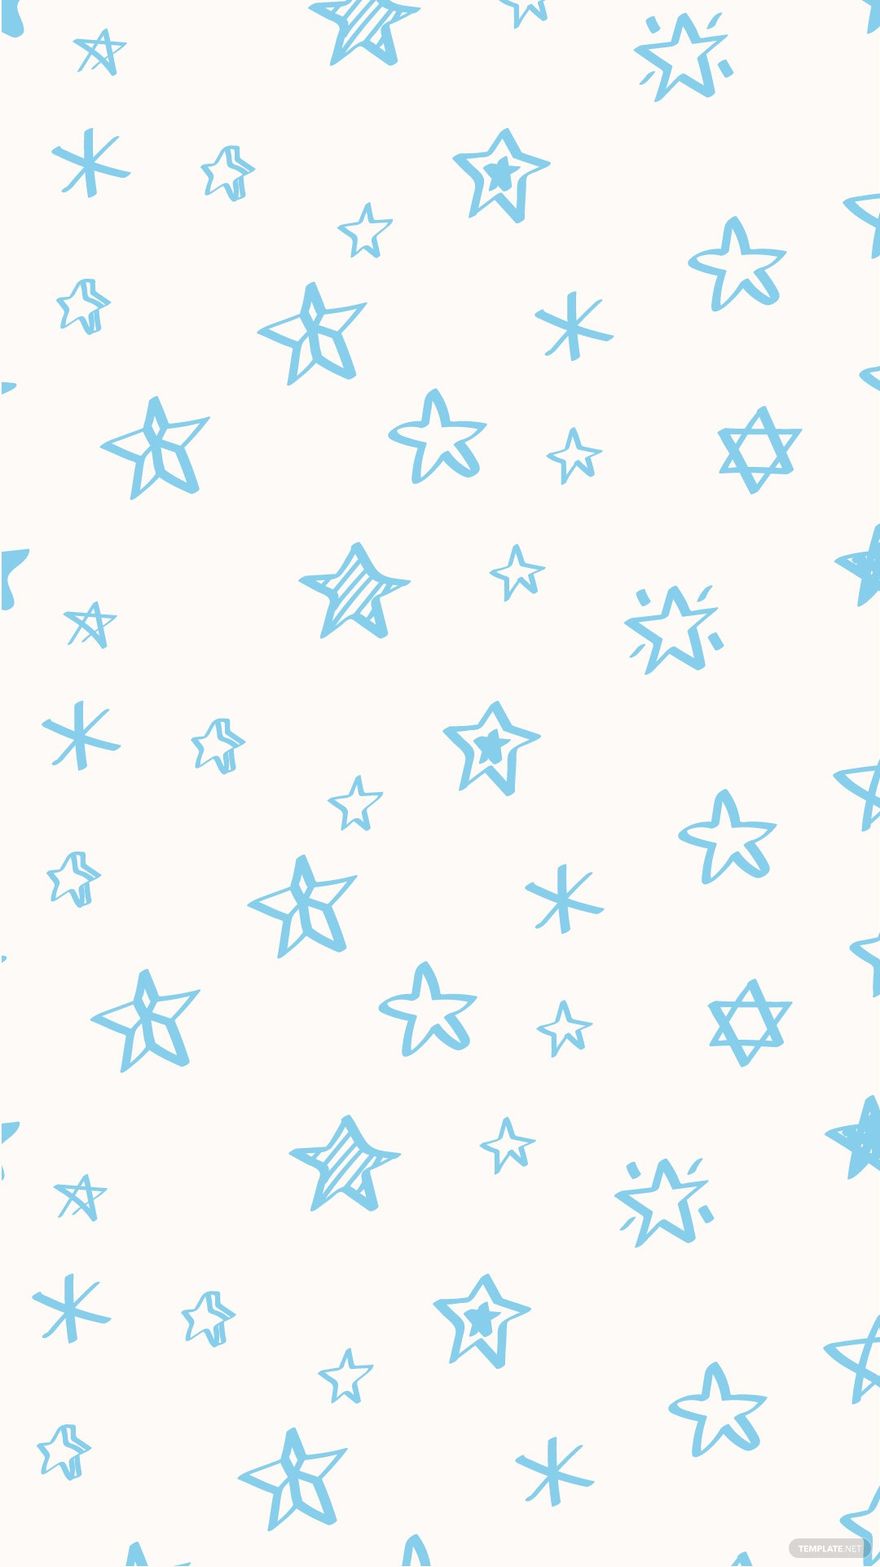 Free Sky Blue Abstract Background - EPS, Illustrator, JPG, PNG ...